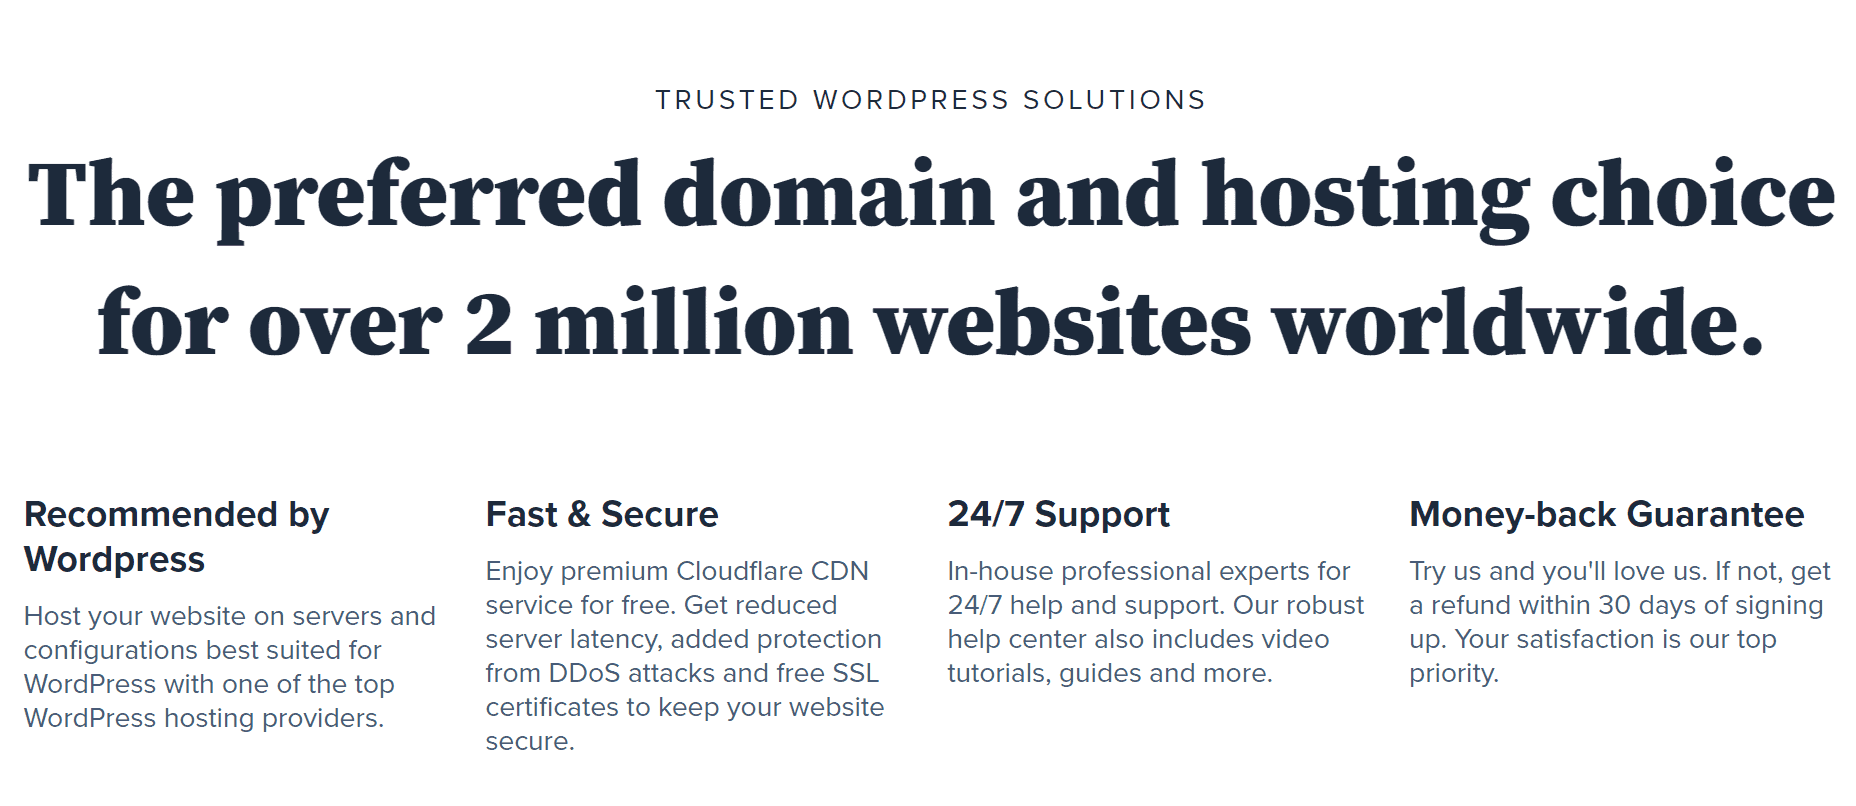 TRUSTED WORDPRESS SOLUTIONS